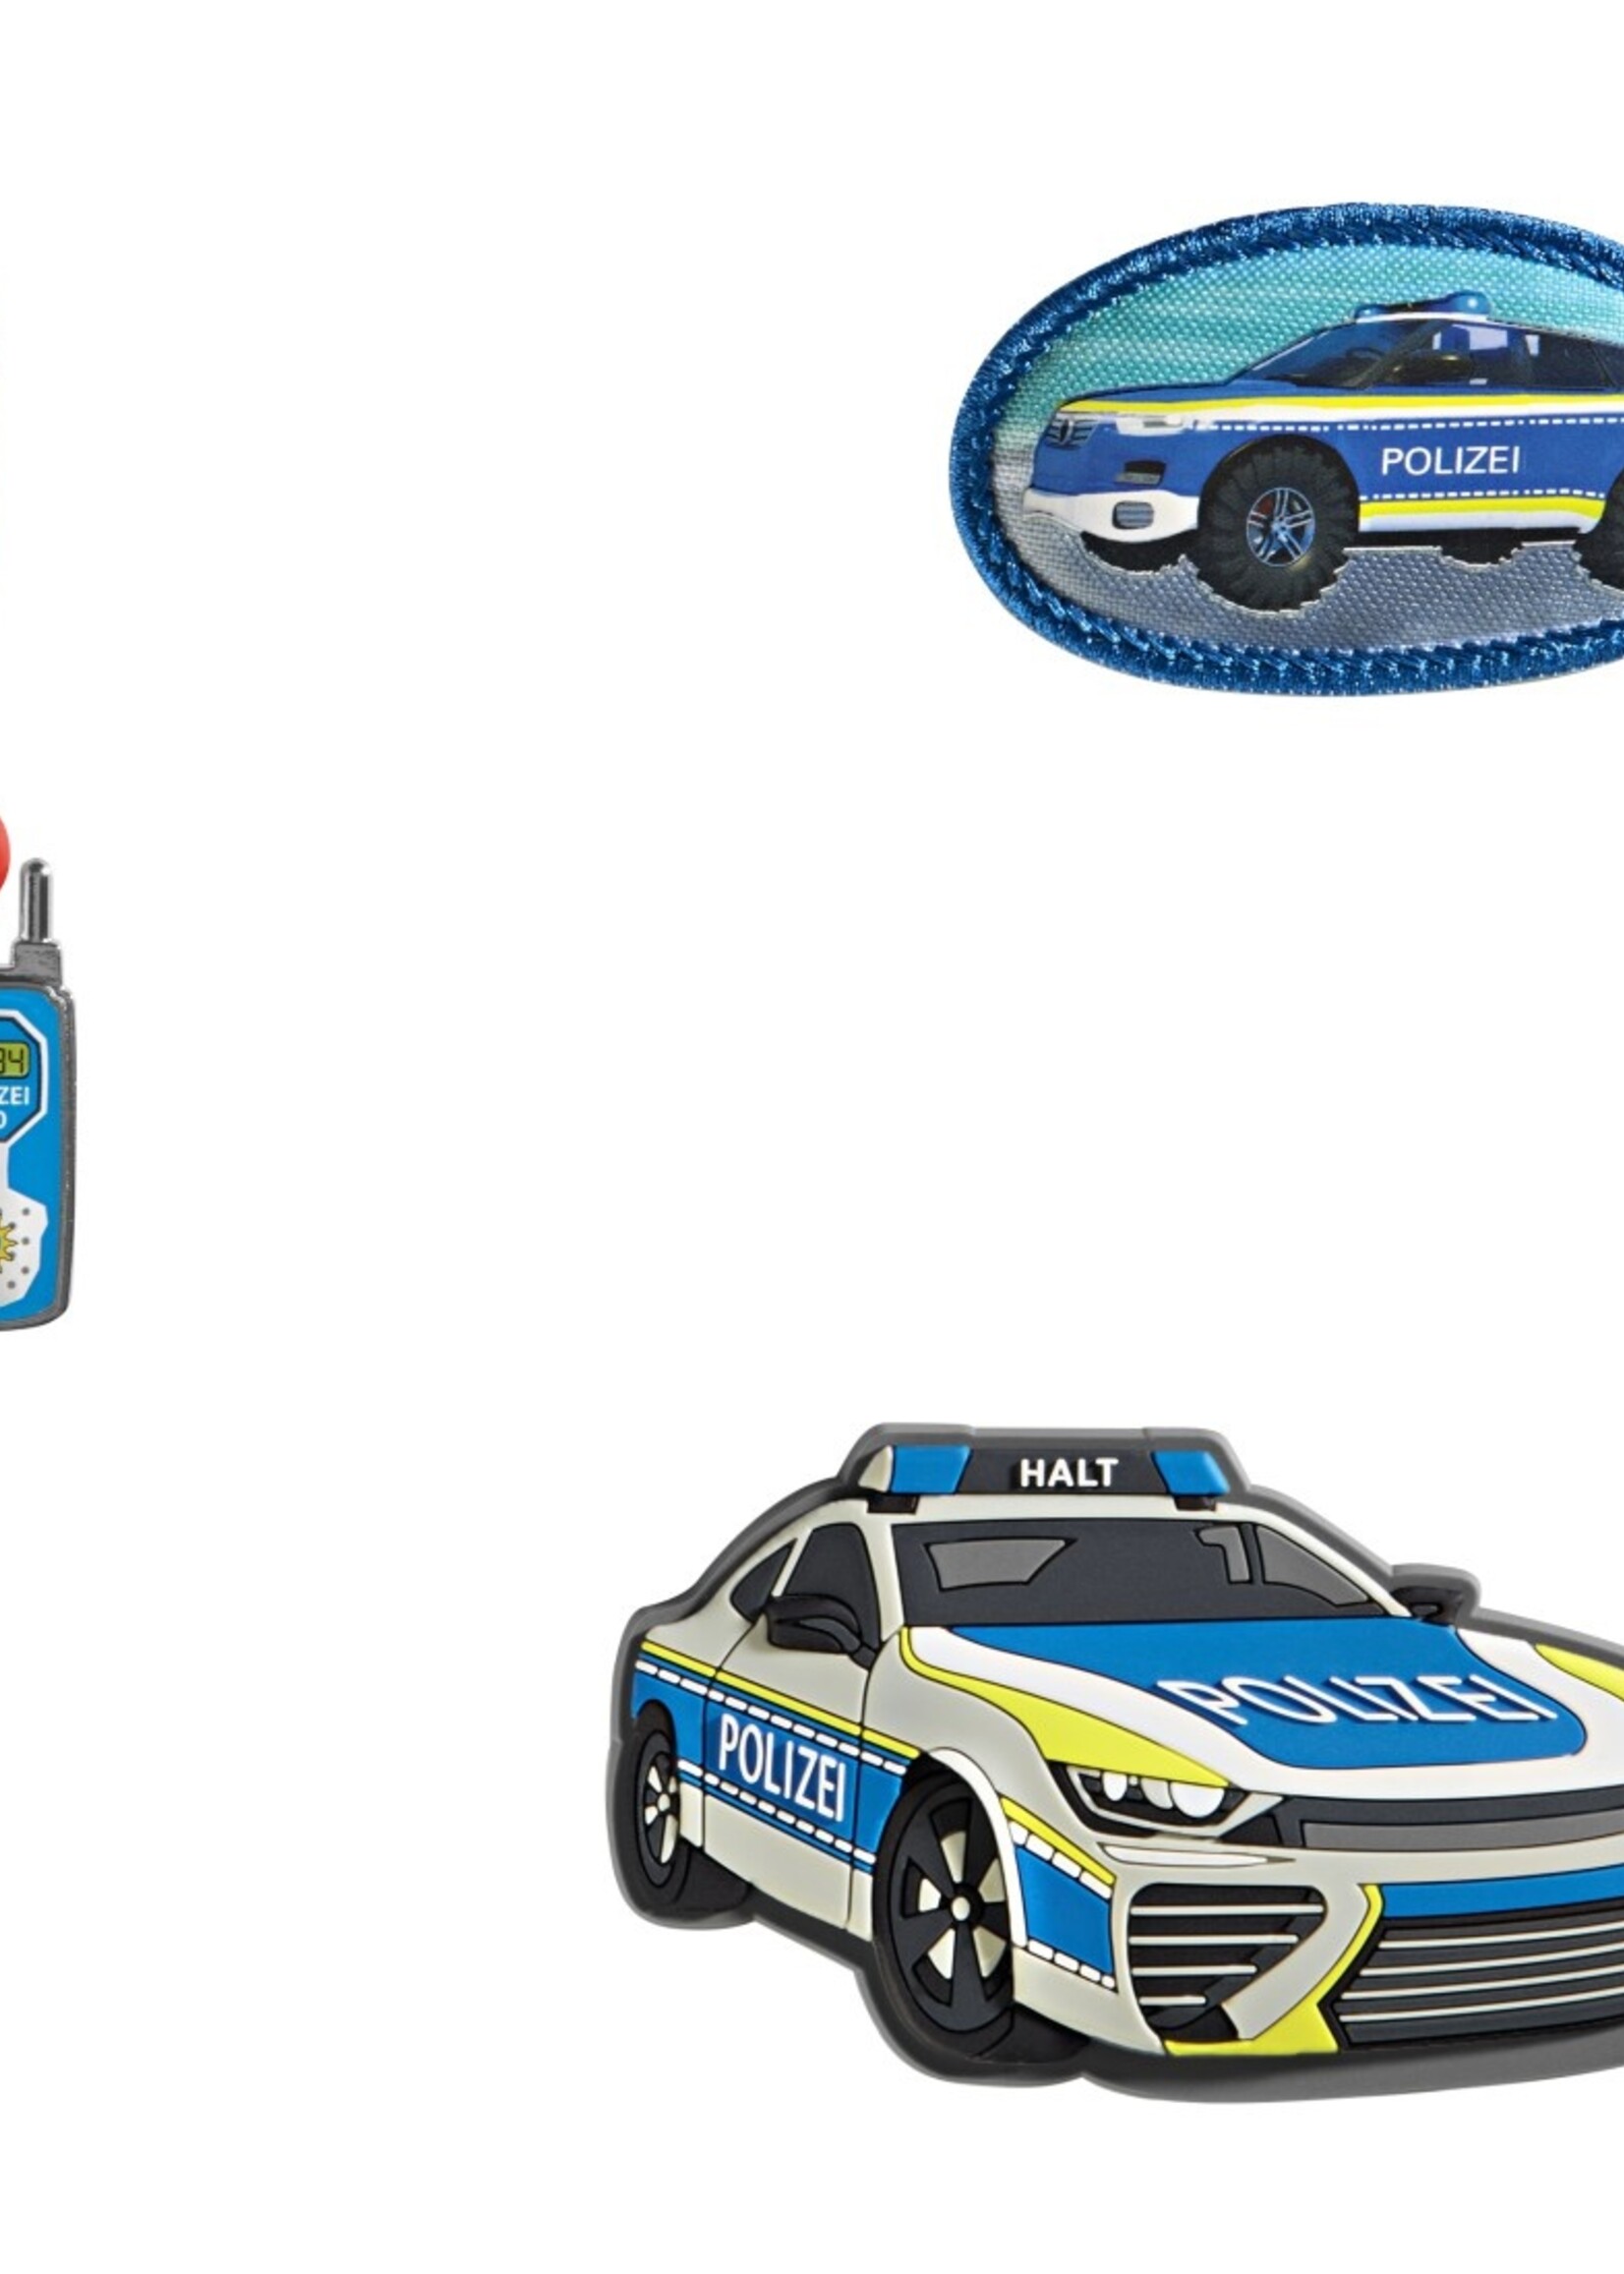 Step by Step MAGIC MAGS "Police Car Cody"